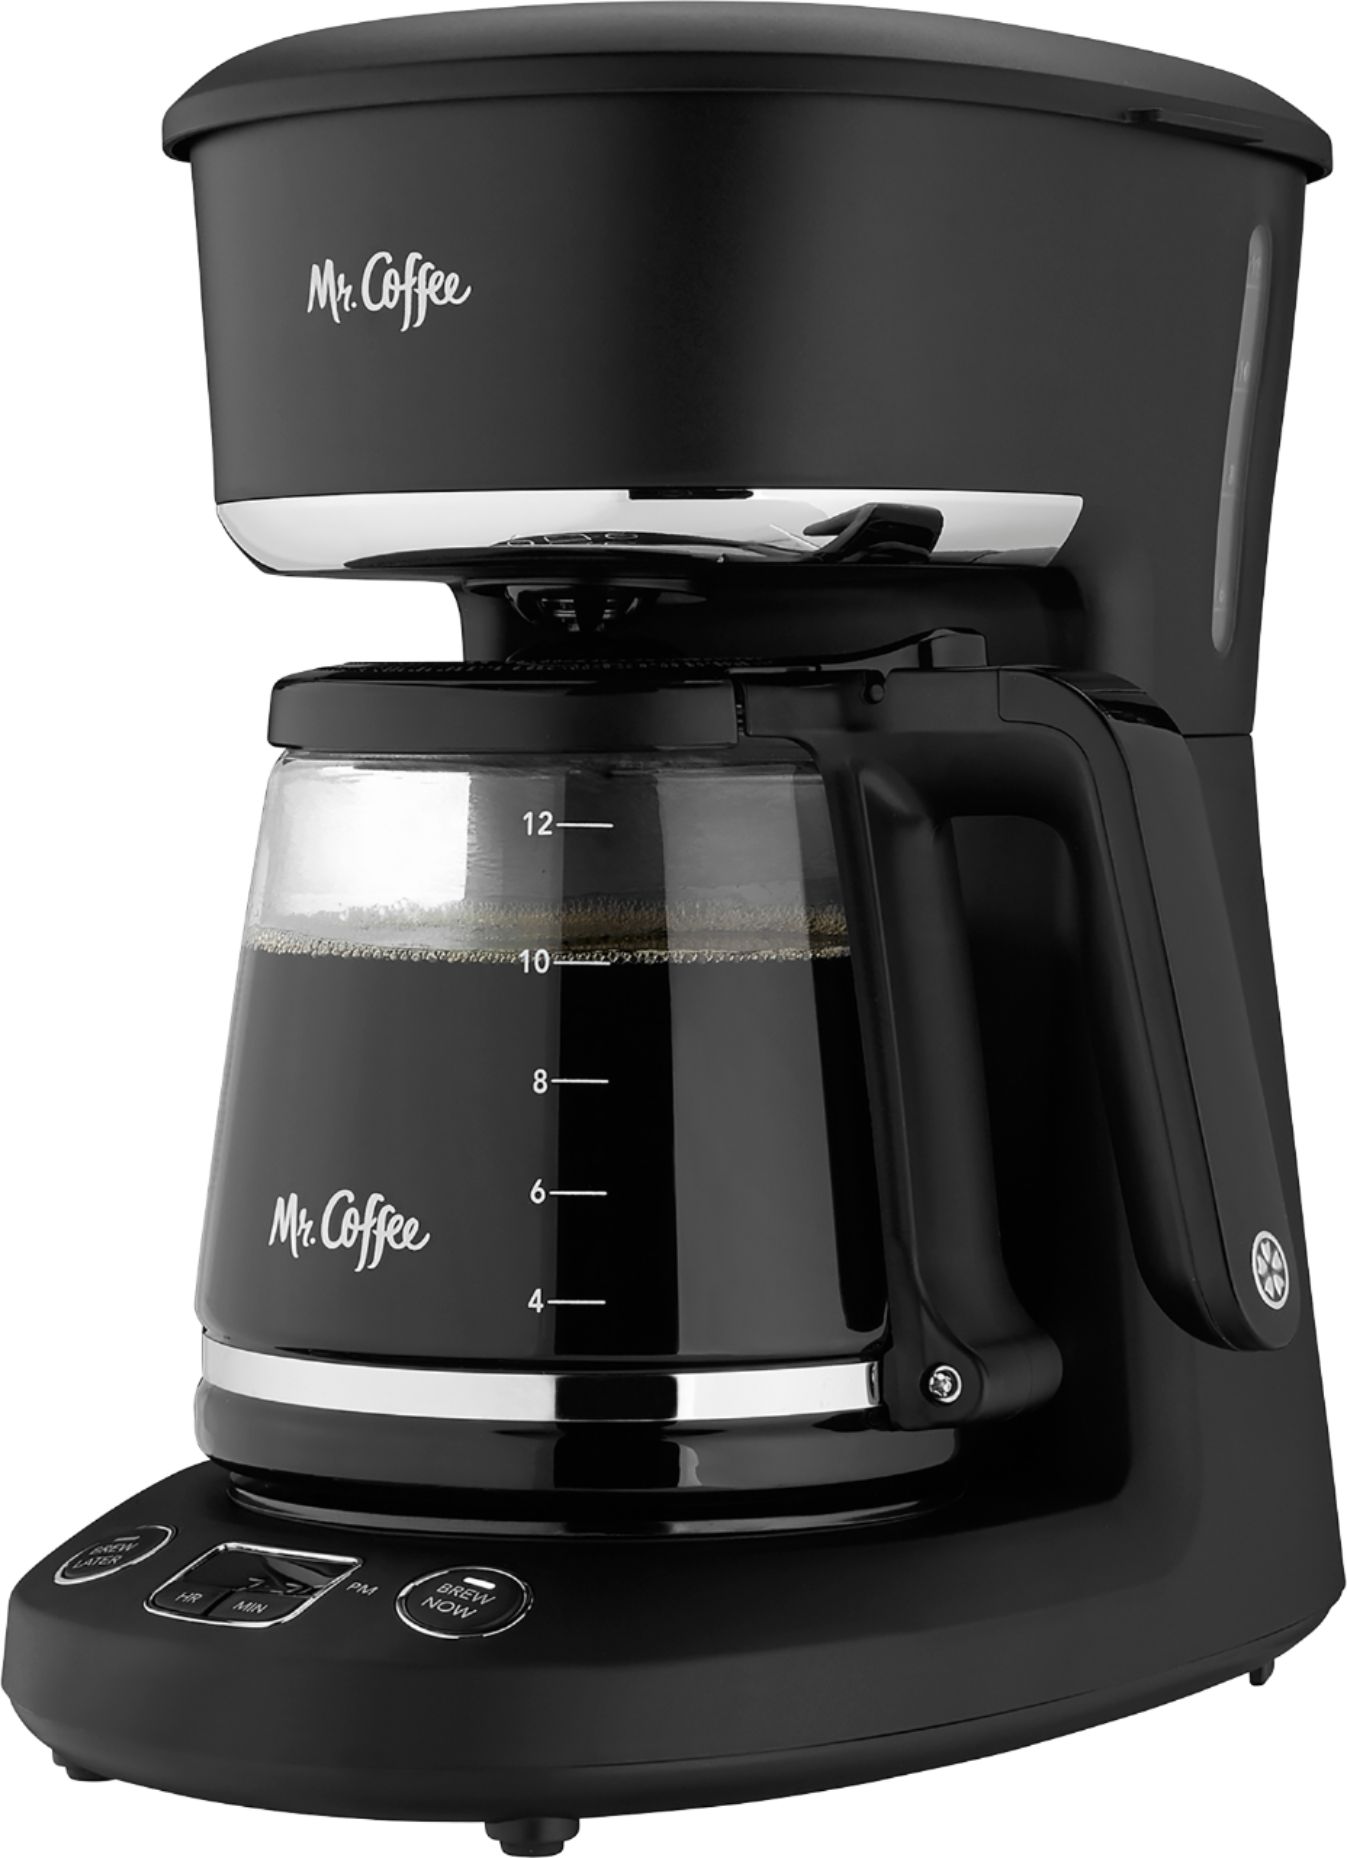 Mr. Coffee Advanced Brew 5-Cup Programmable Coffee Maker with Stainless  Steel Carafe Black/Chrome, JWX9-RB 